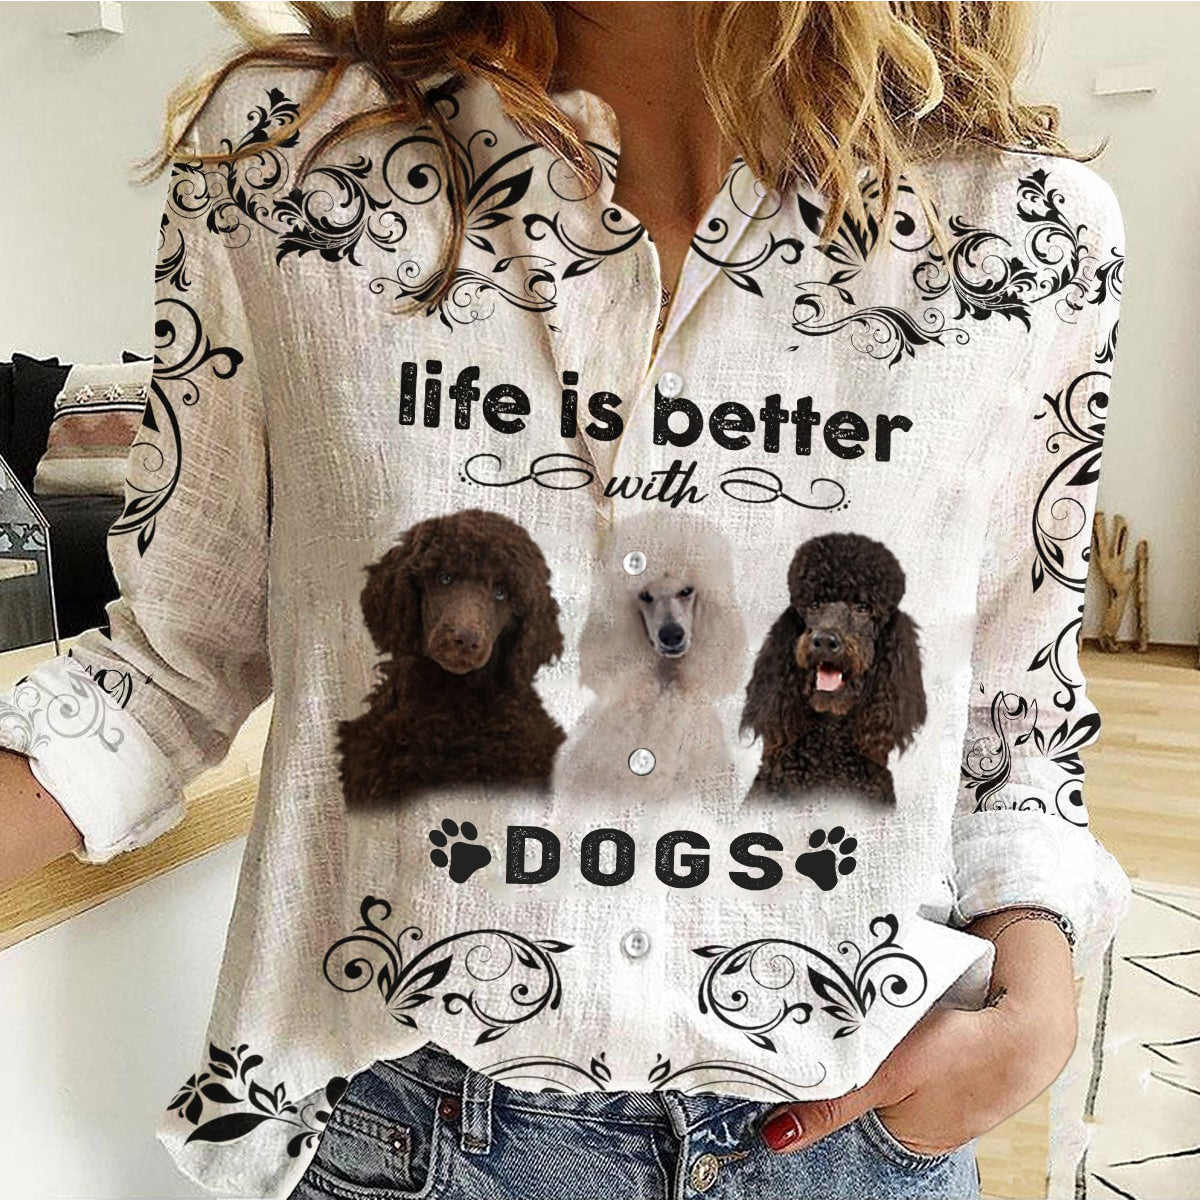 Standard Poodle - Life Is Better With Dogs Women's Long-Sleeve Shirt